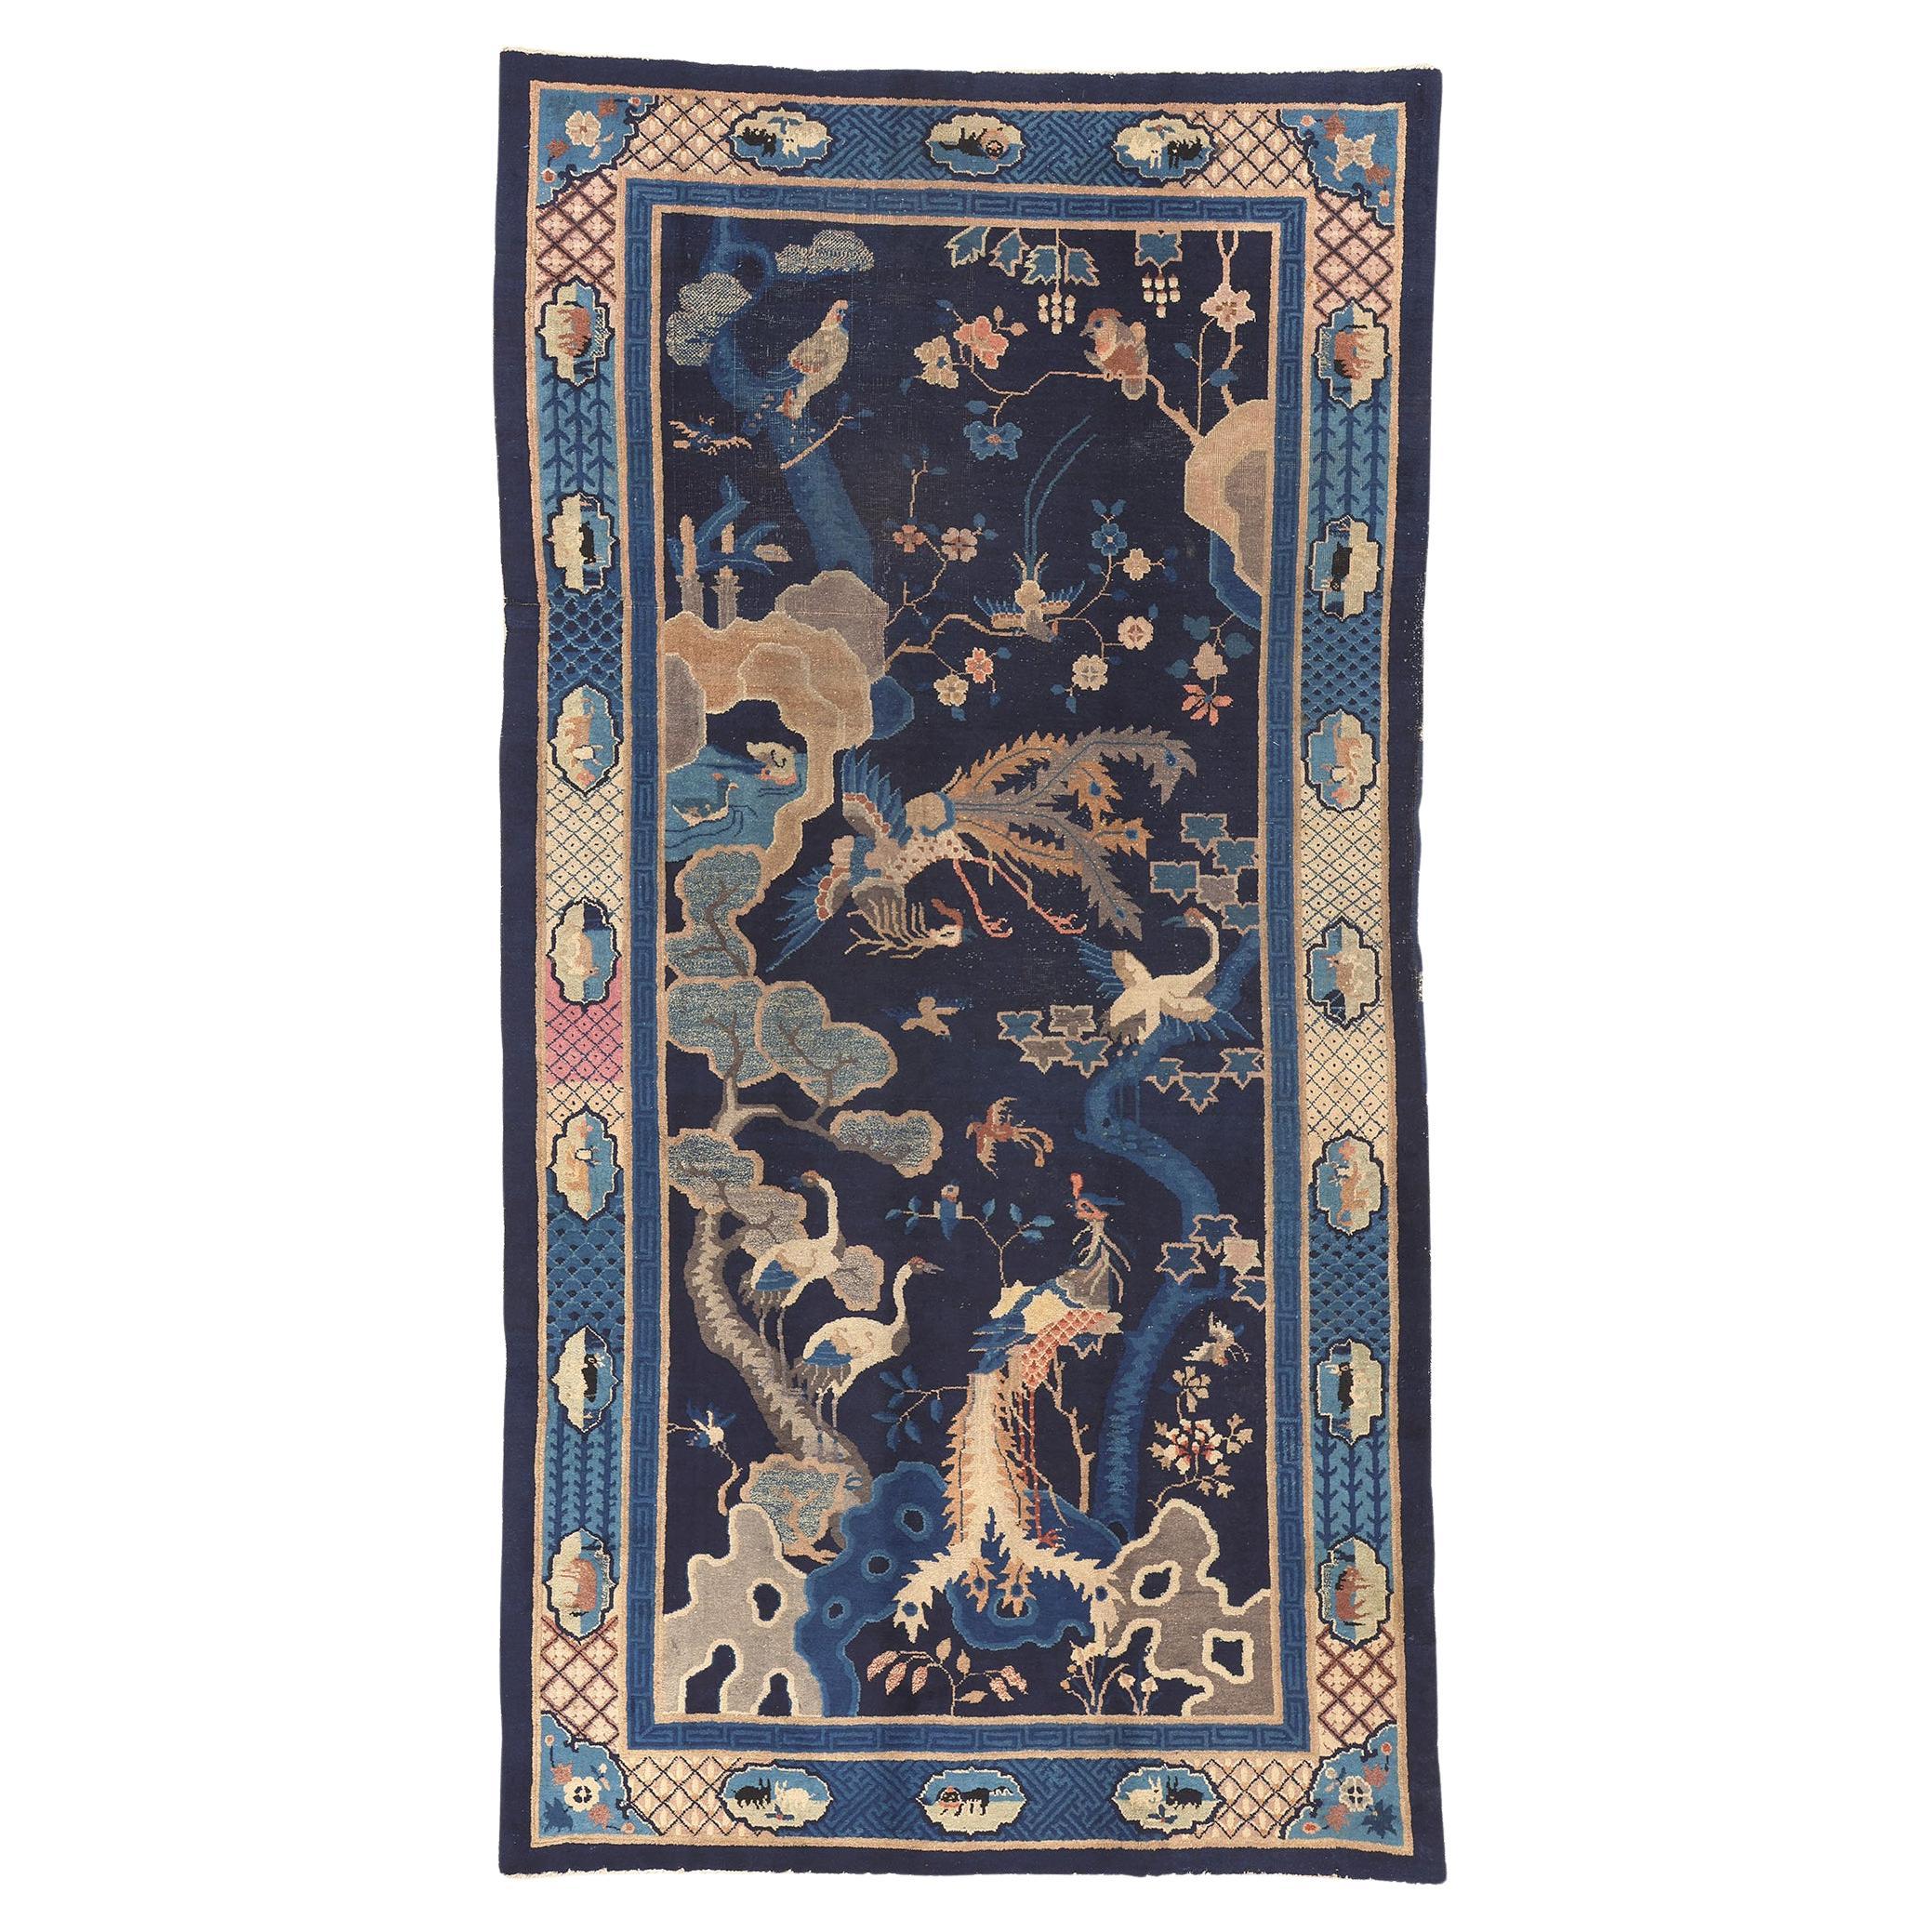 Antique Chinese Pictorial Rug, Bai Niao Chao Feng, Birds Saluting the Phoenix For Sale